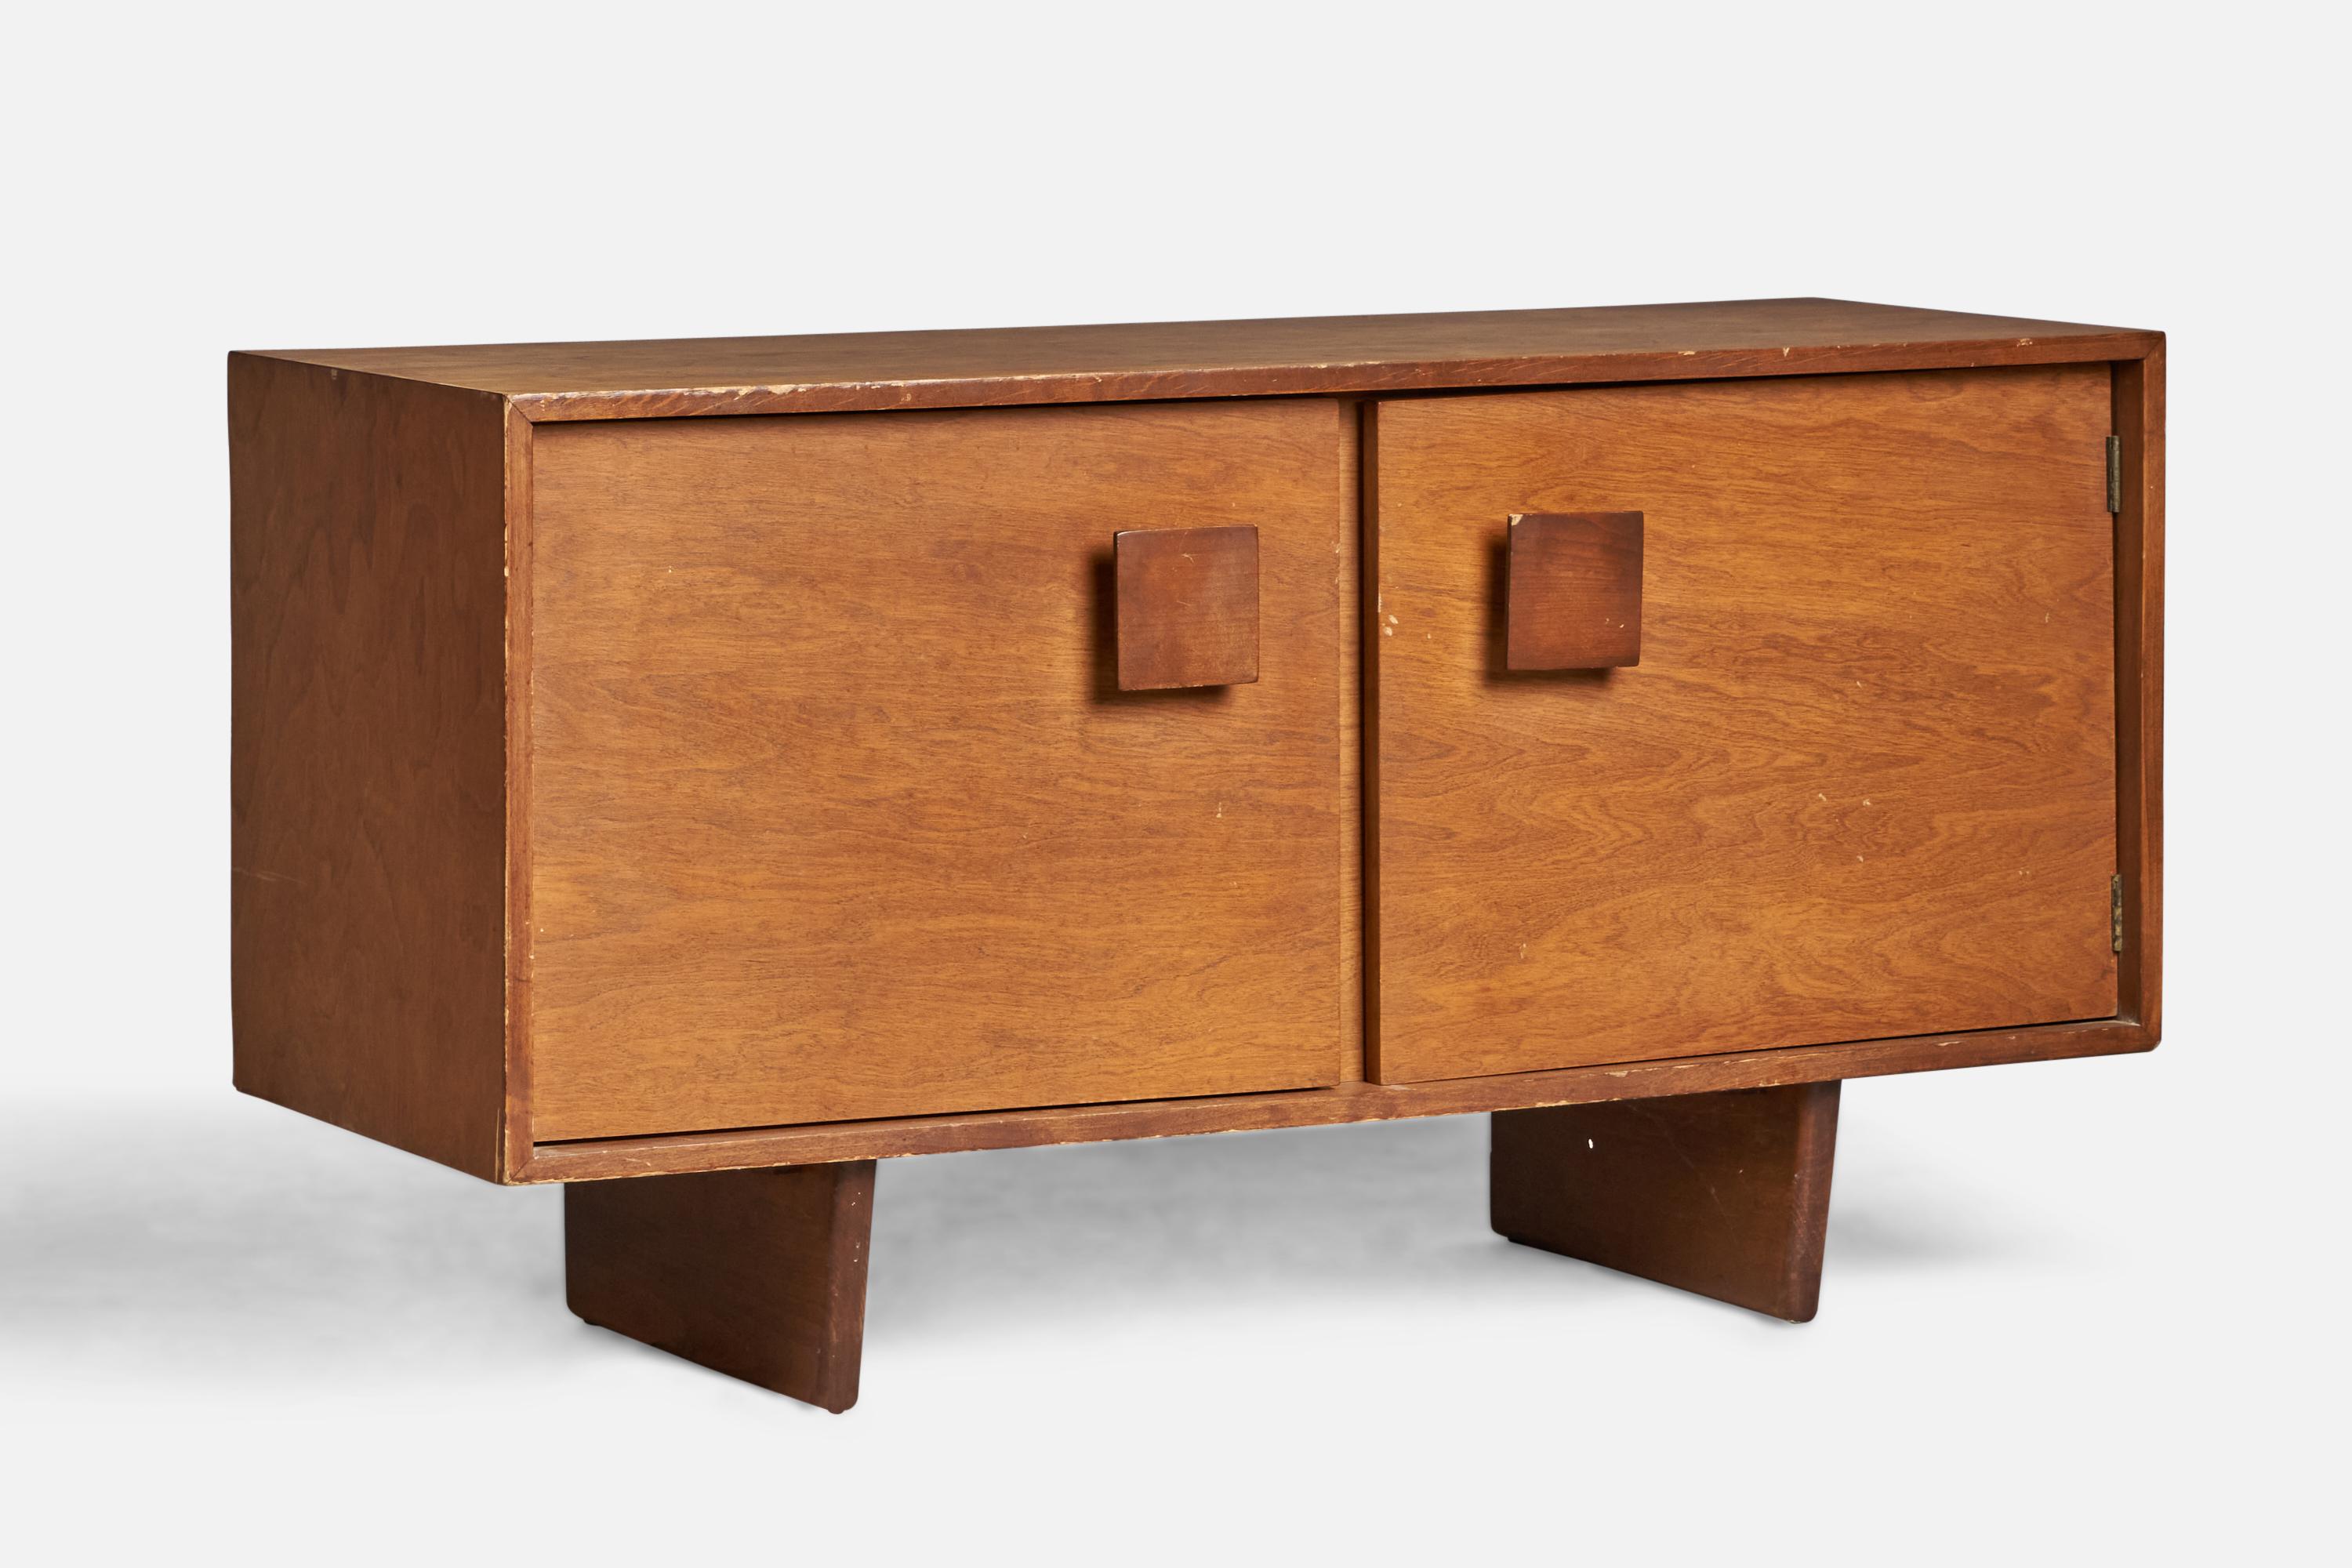 An oak cabinet designed by Paul Frankl and produced by Barzilay, USA, 1940s.